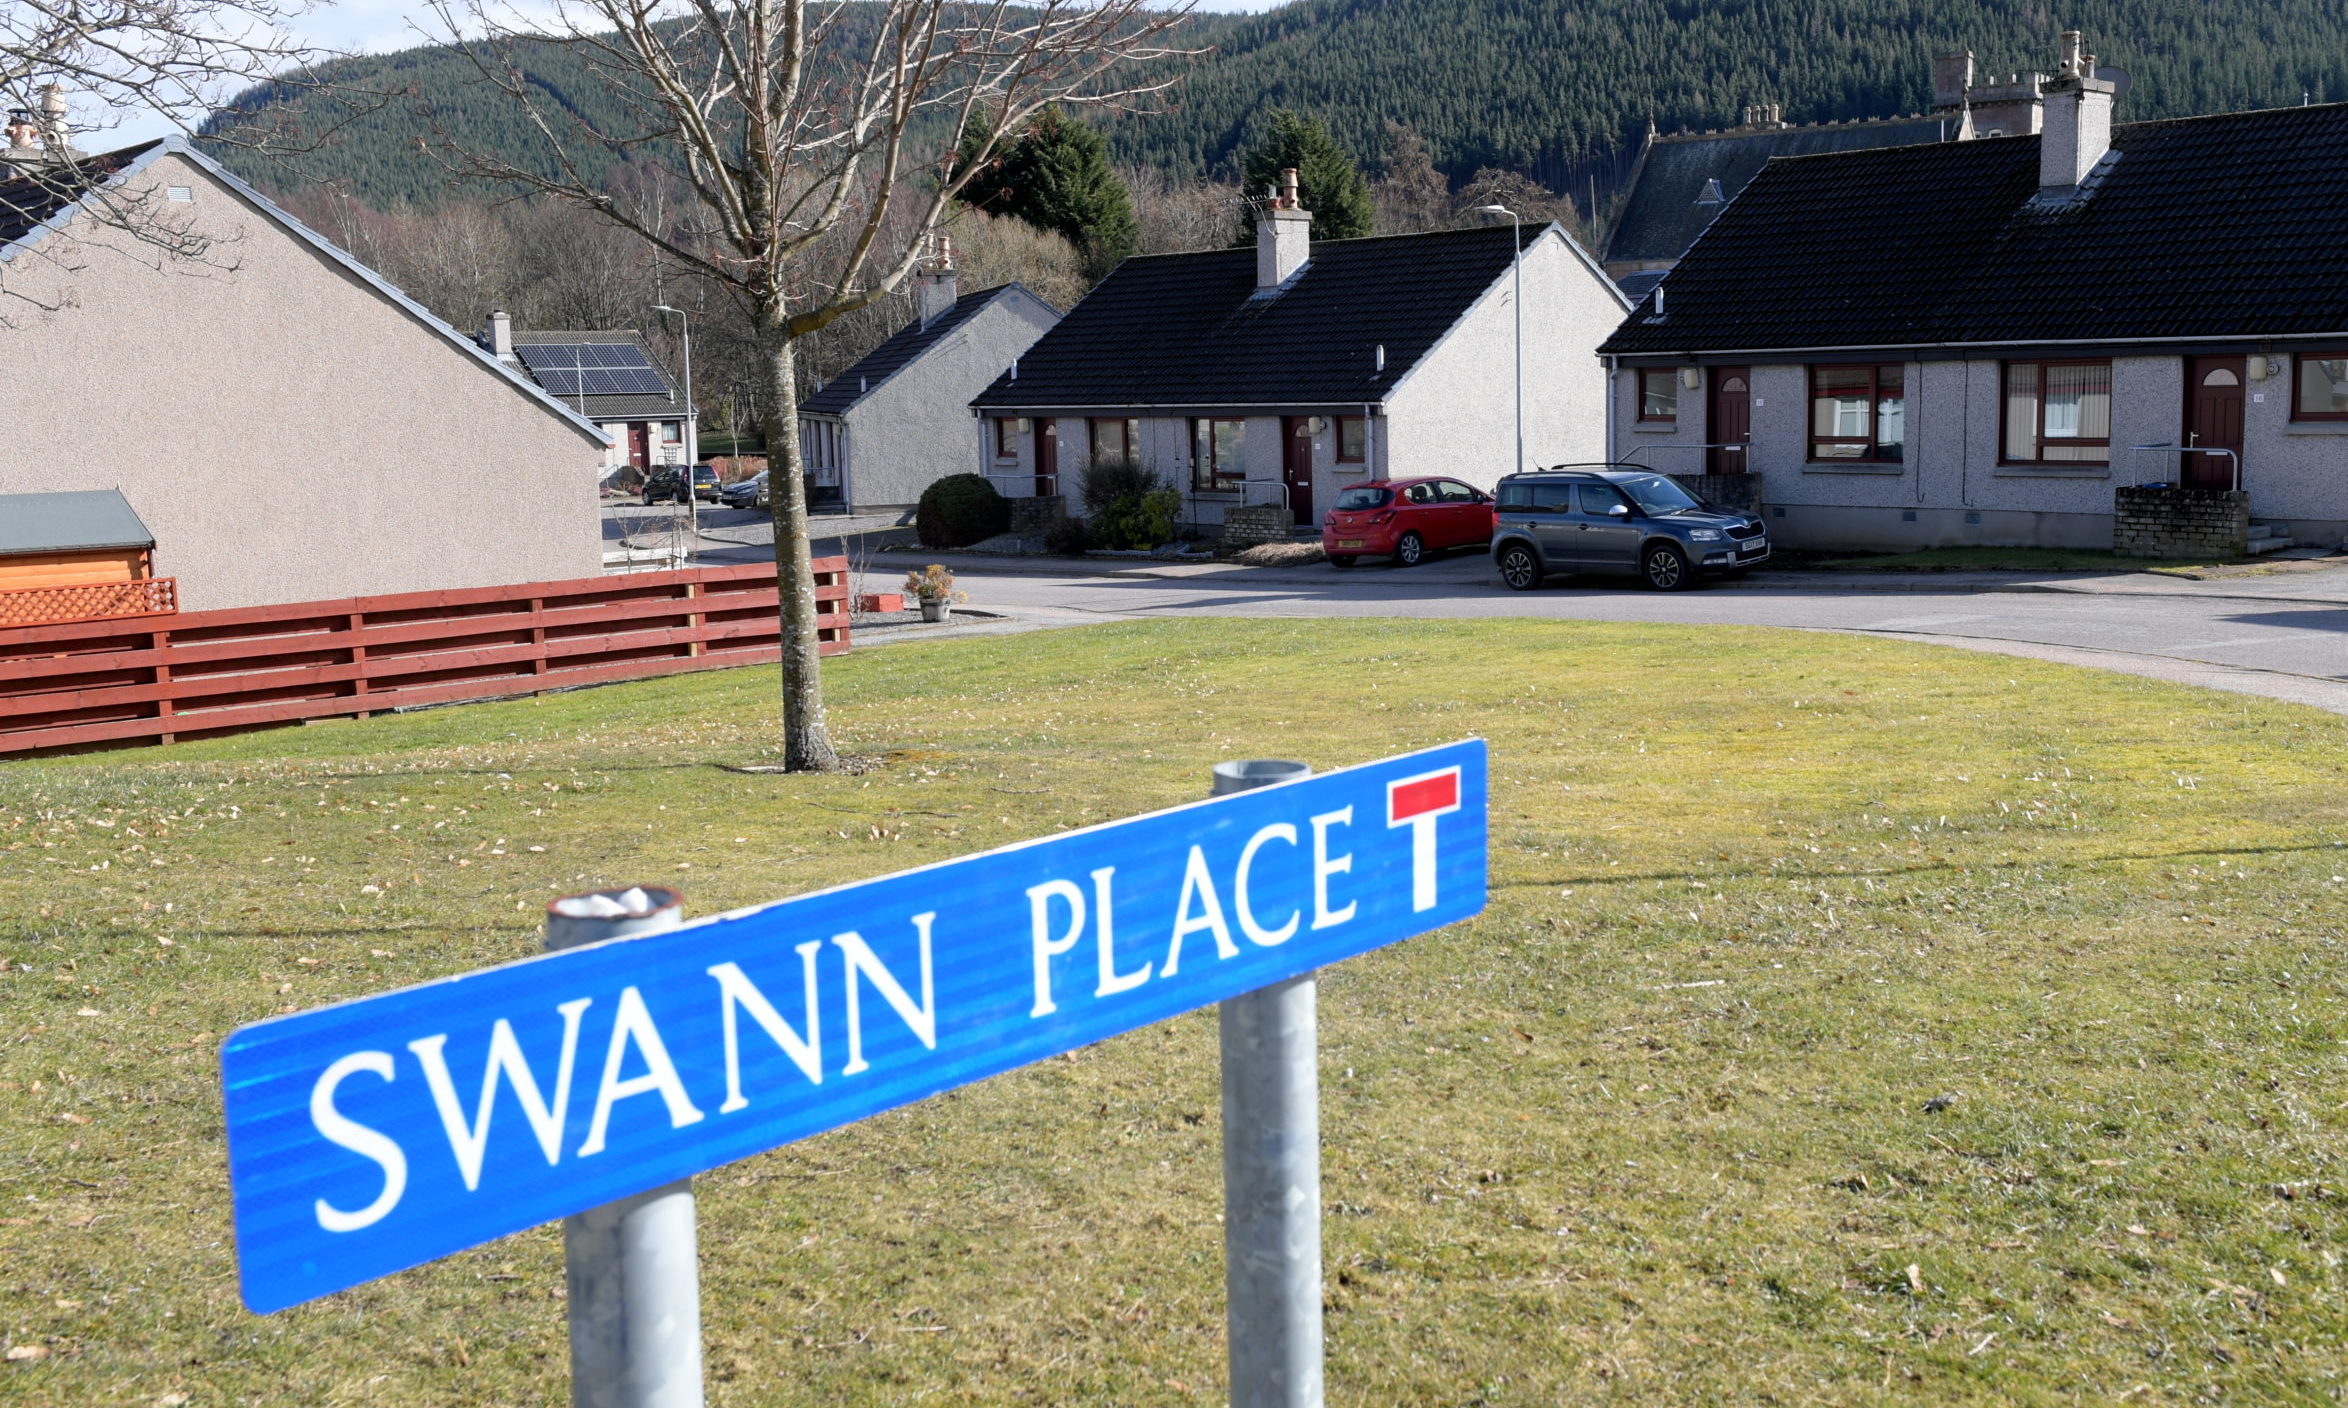 Swann Place in Ballater.
Picture by Kath Flannery.